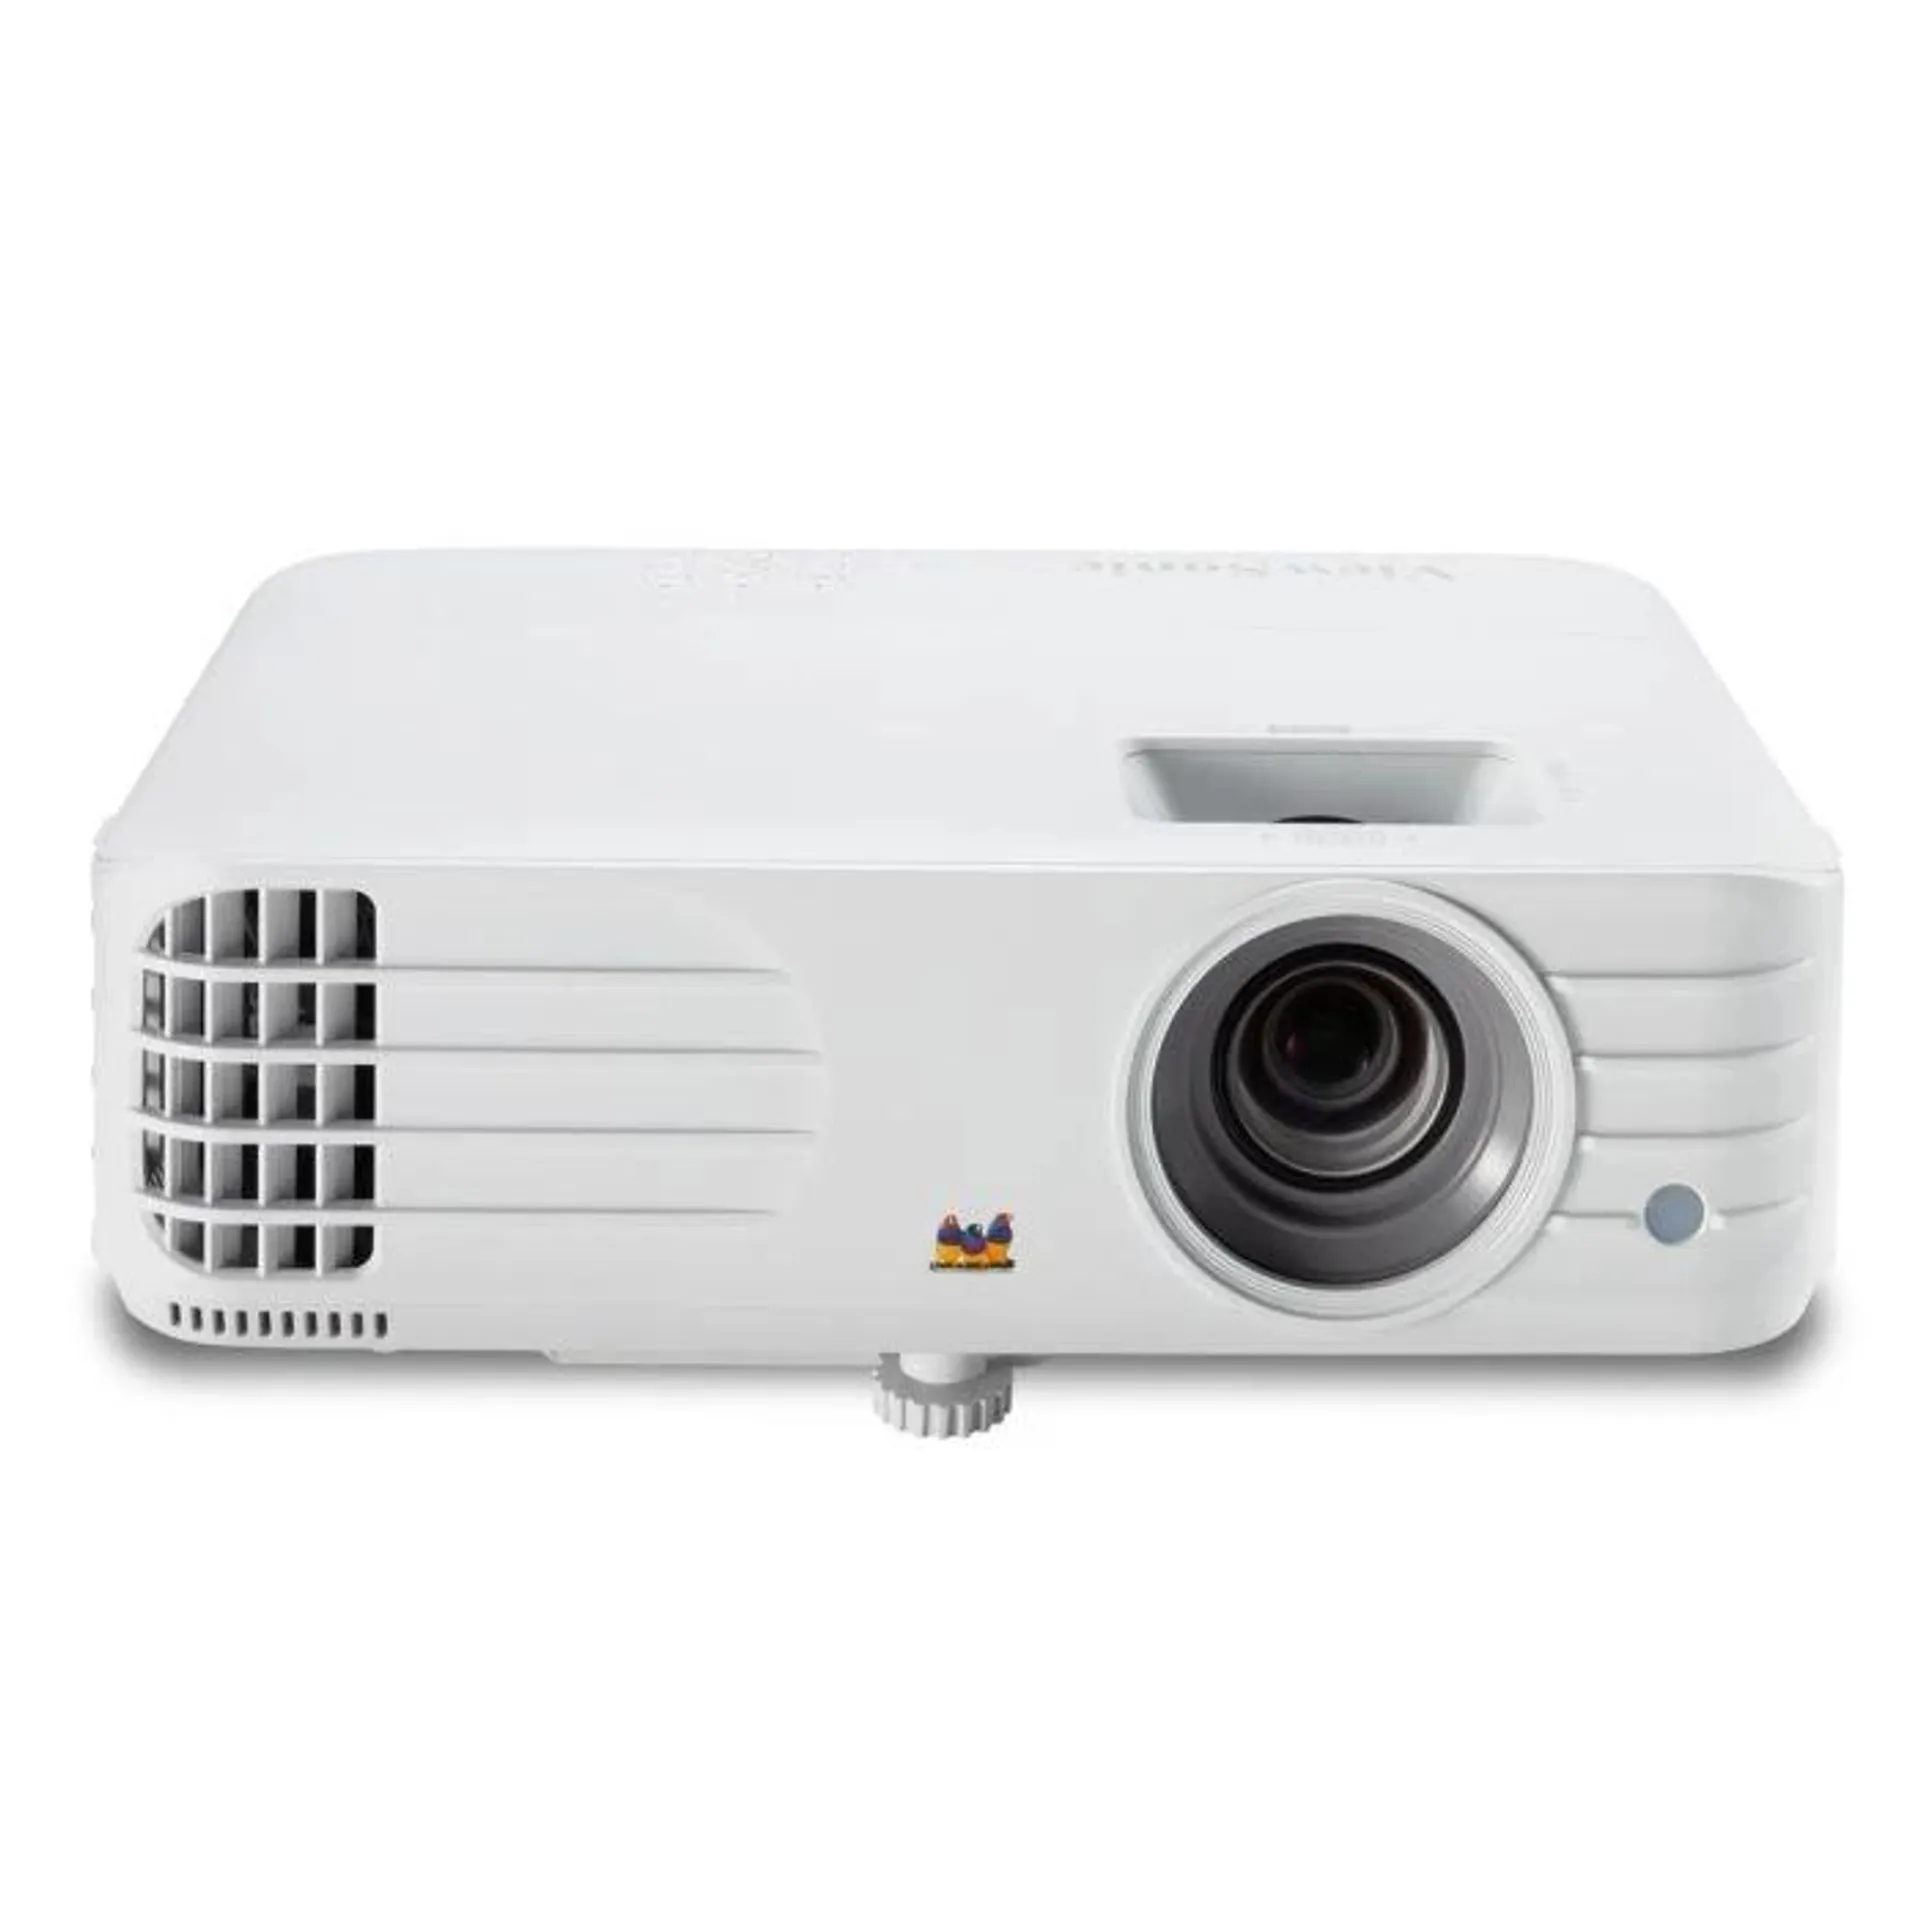 PG701WU - 3500 Lumens WUXGA Projector with Low Input Lag and Vertical Keystone